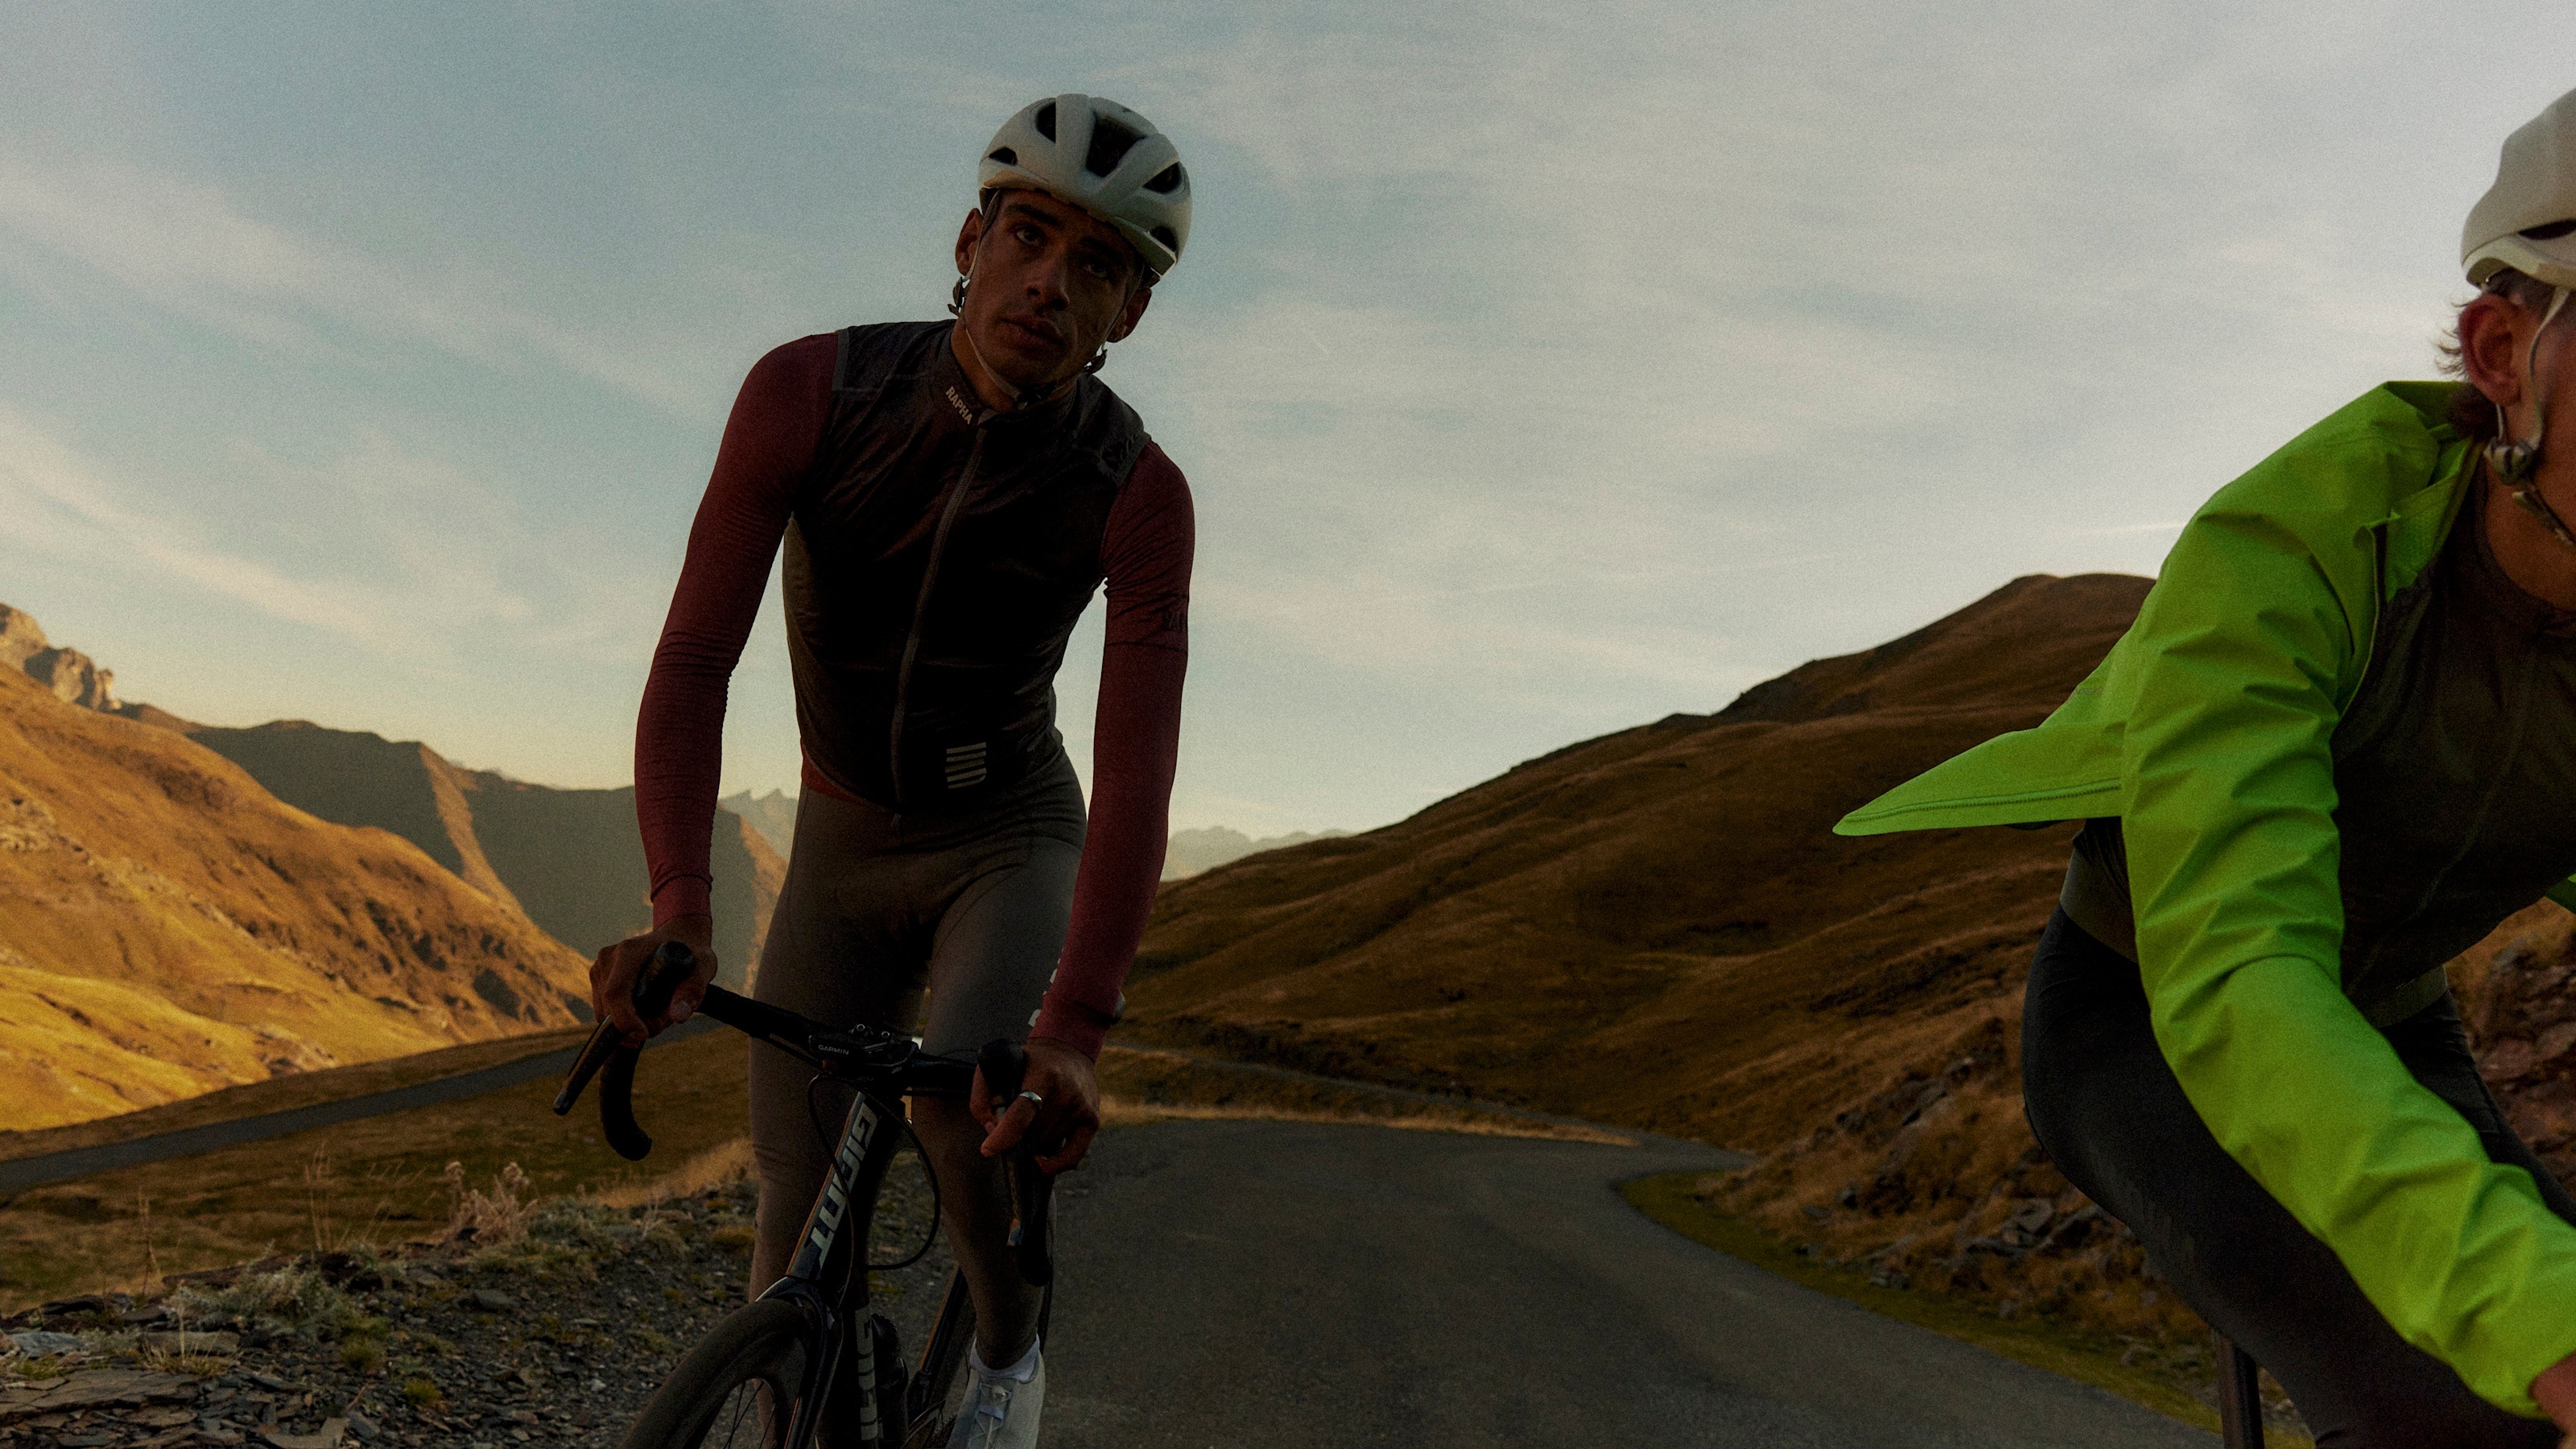 Rapha's Guide to Men's Tights